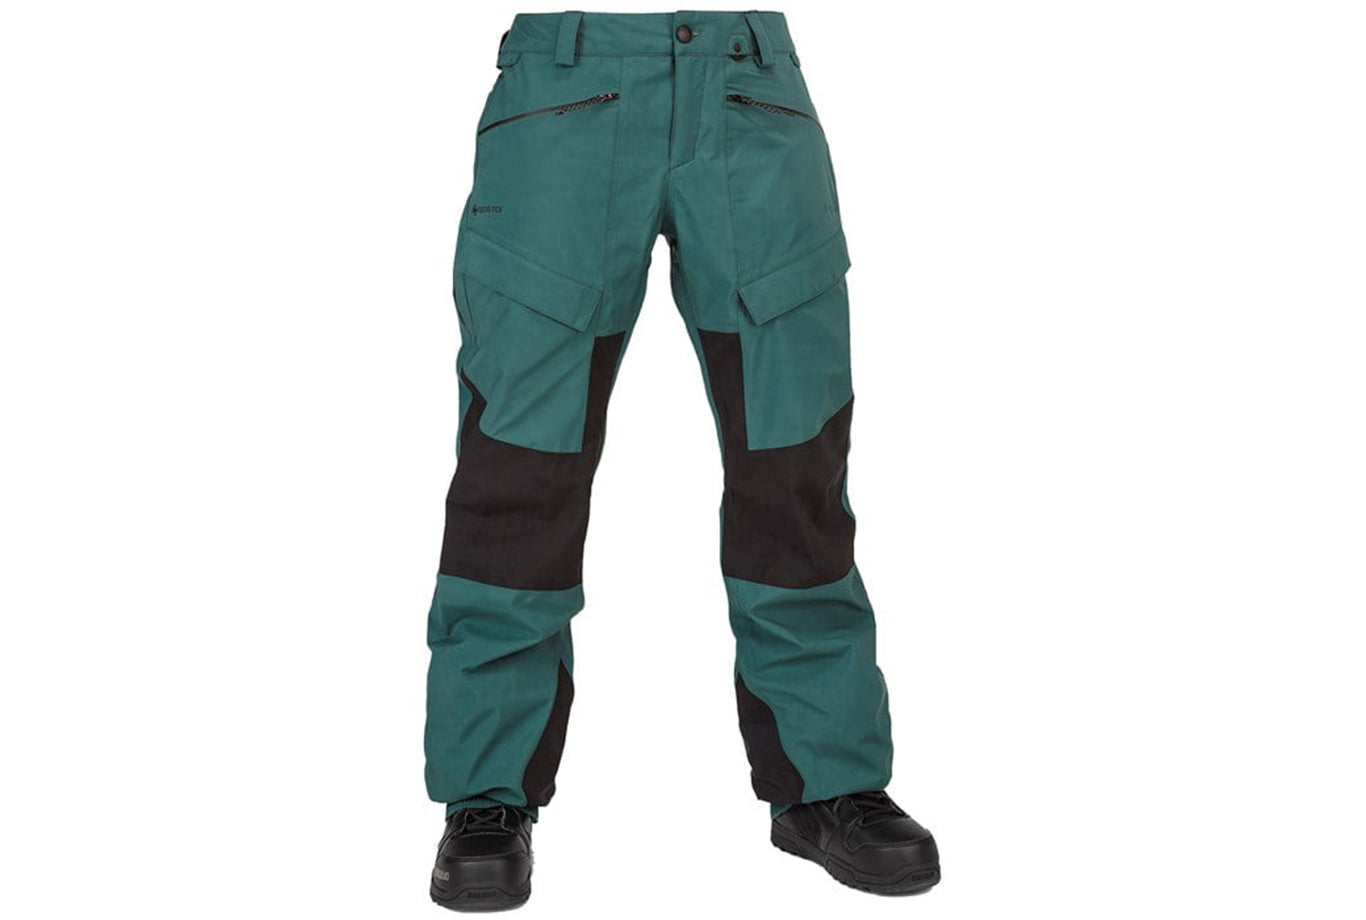 V.CO AT STRETCH GORE-TEX PANT – Boutique Radical Sport